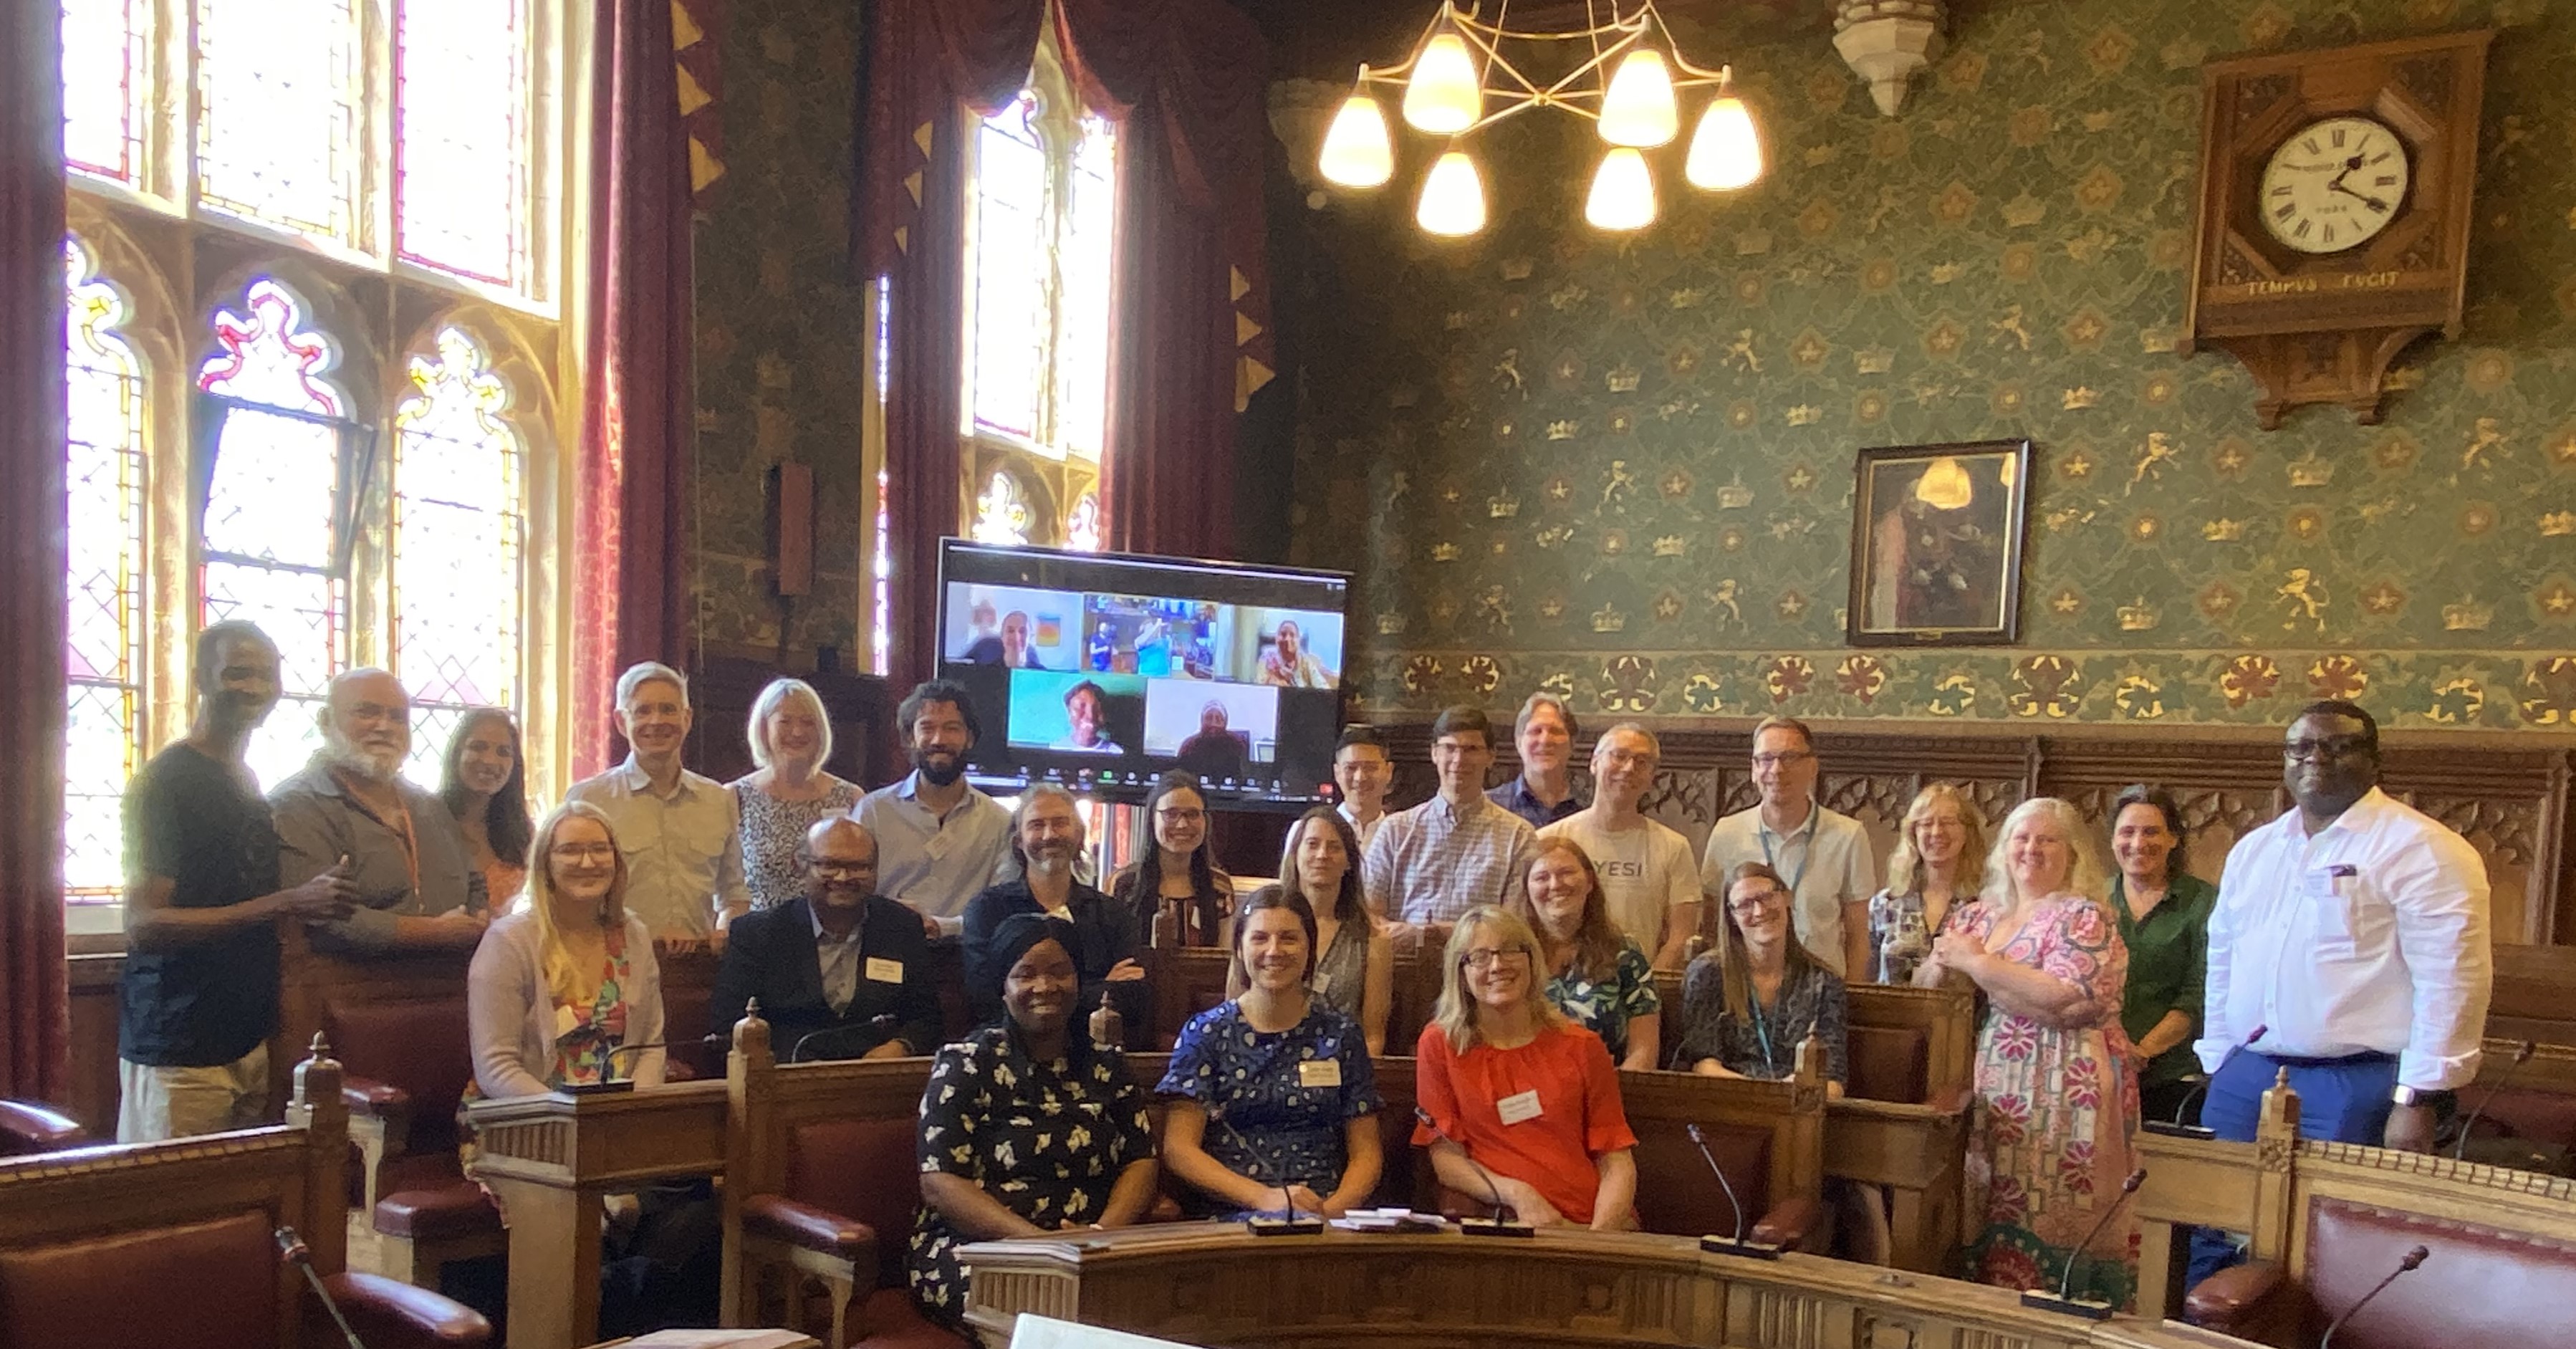 Group photo of the Dragons' Den attendees taken in The Guildhall Council Chamber